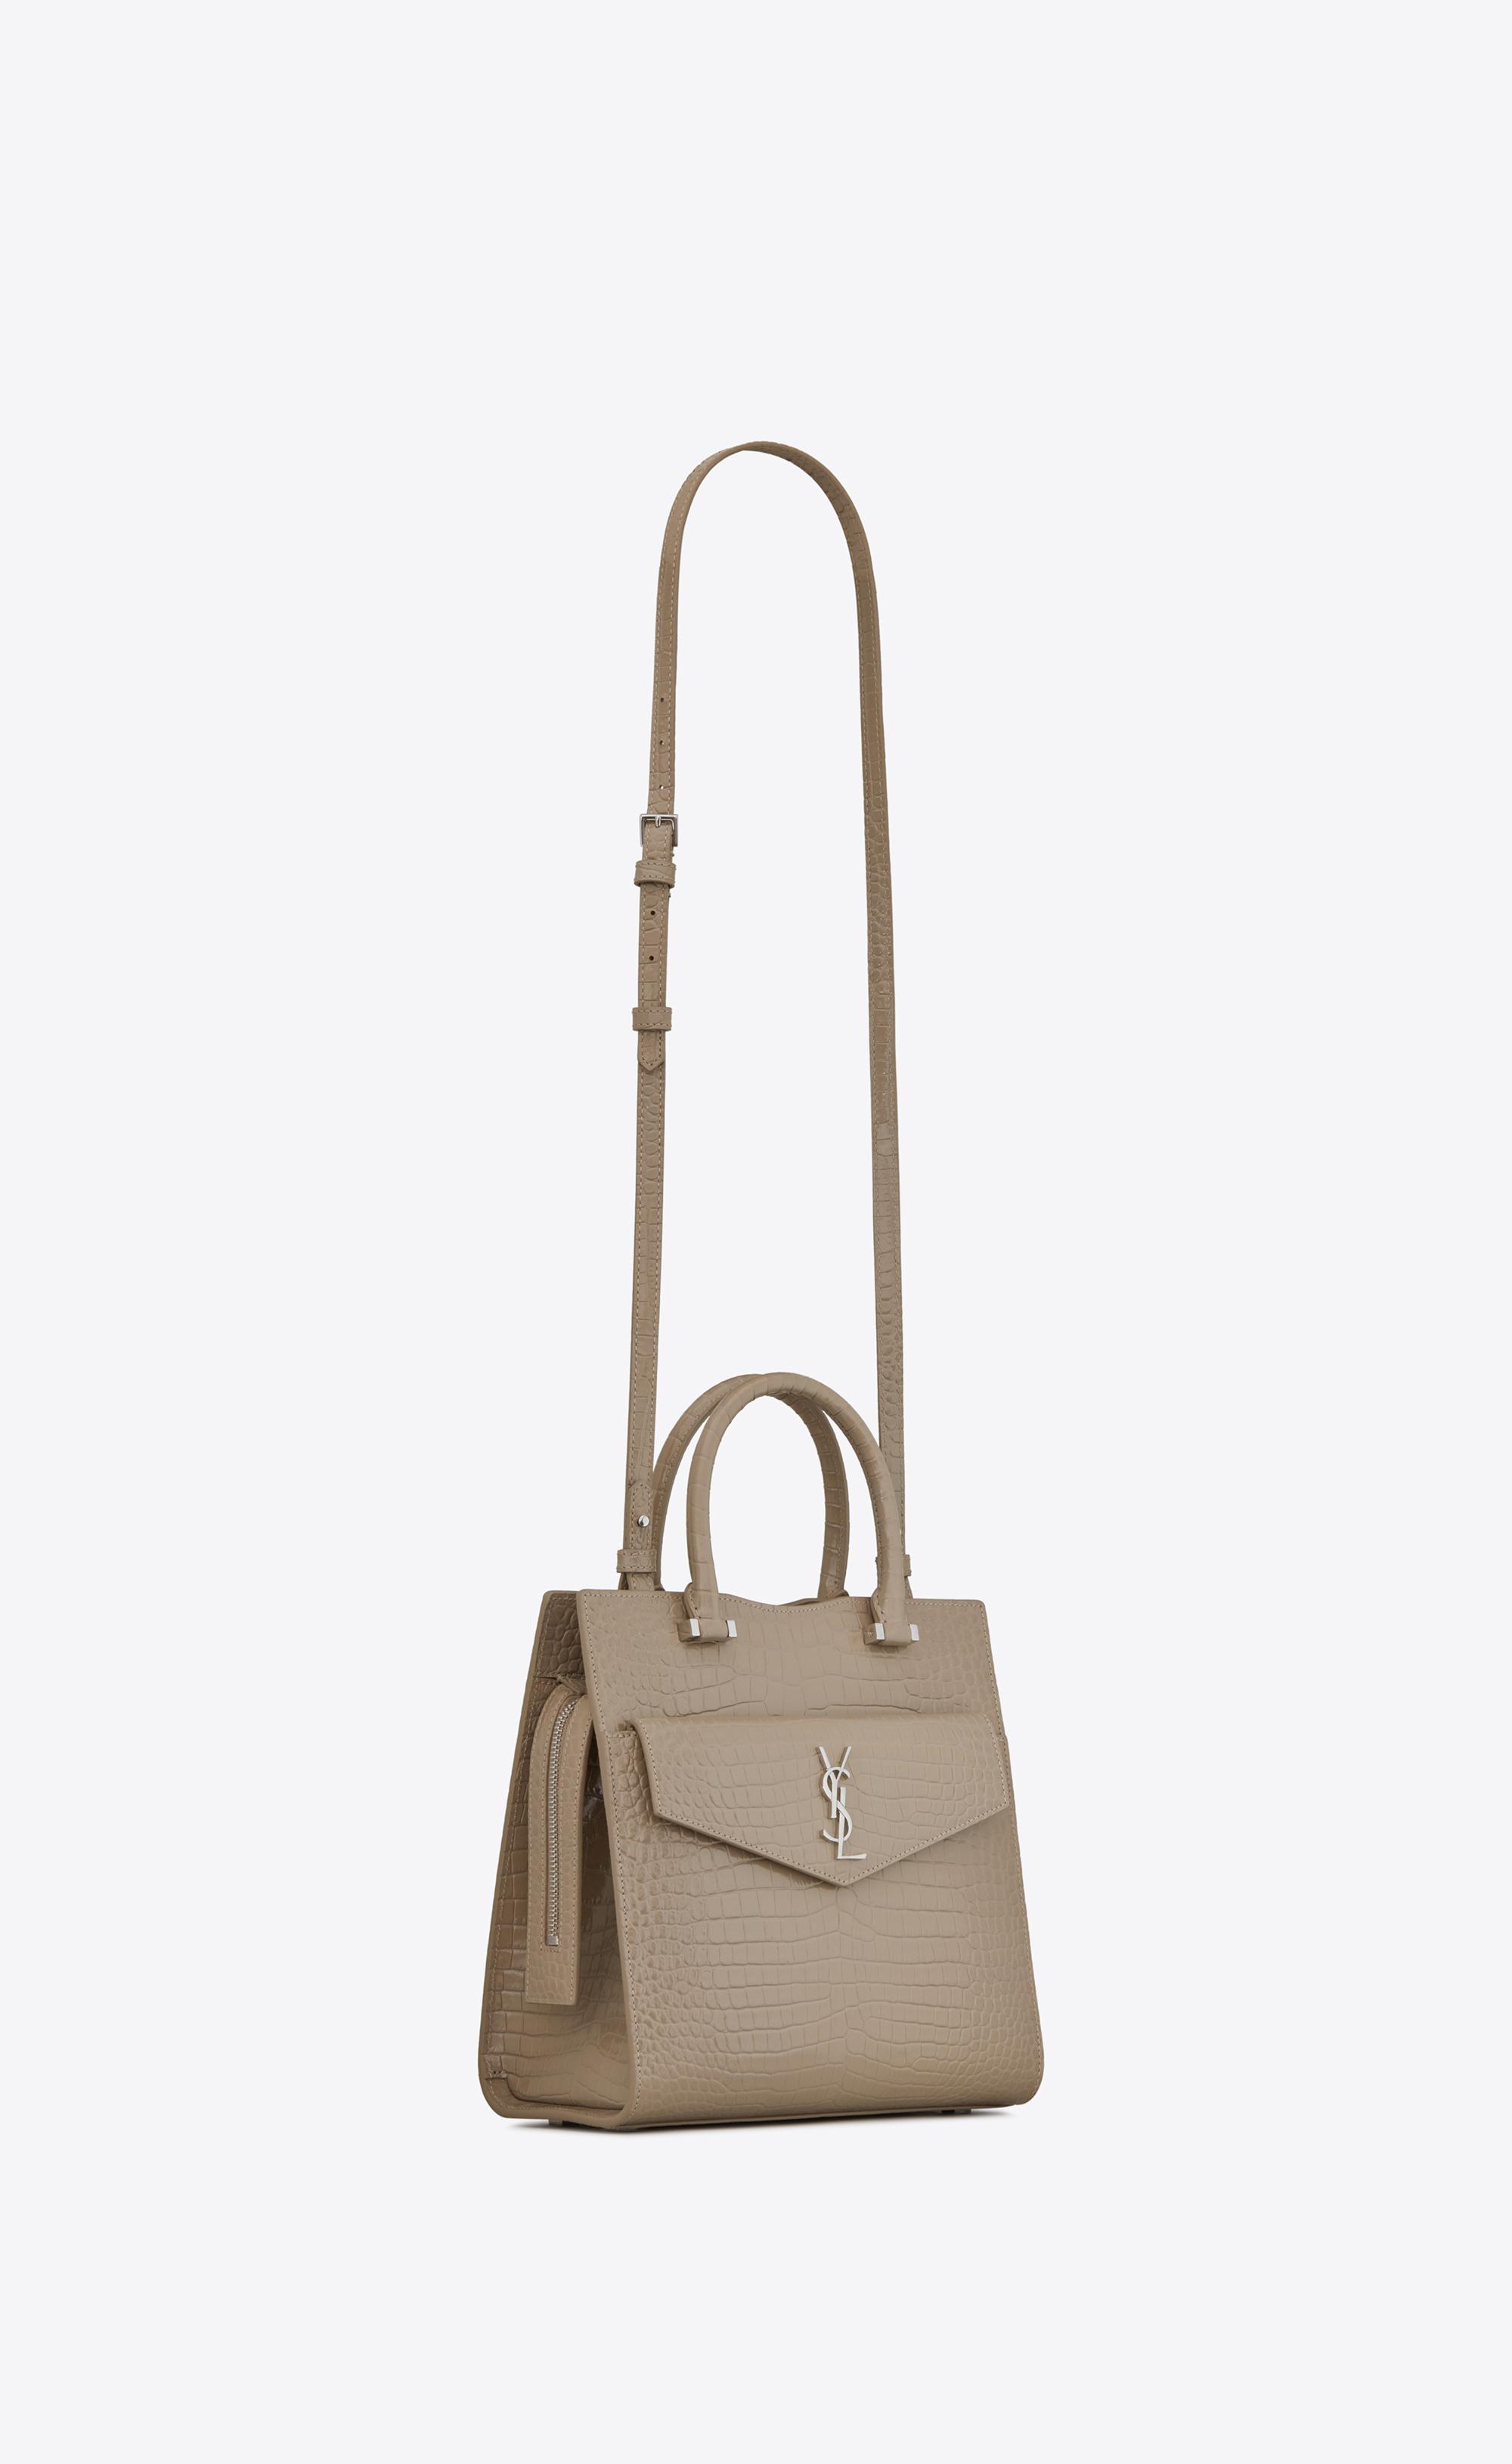 Saint Laurent Uptown Small Tote in Gray